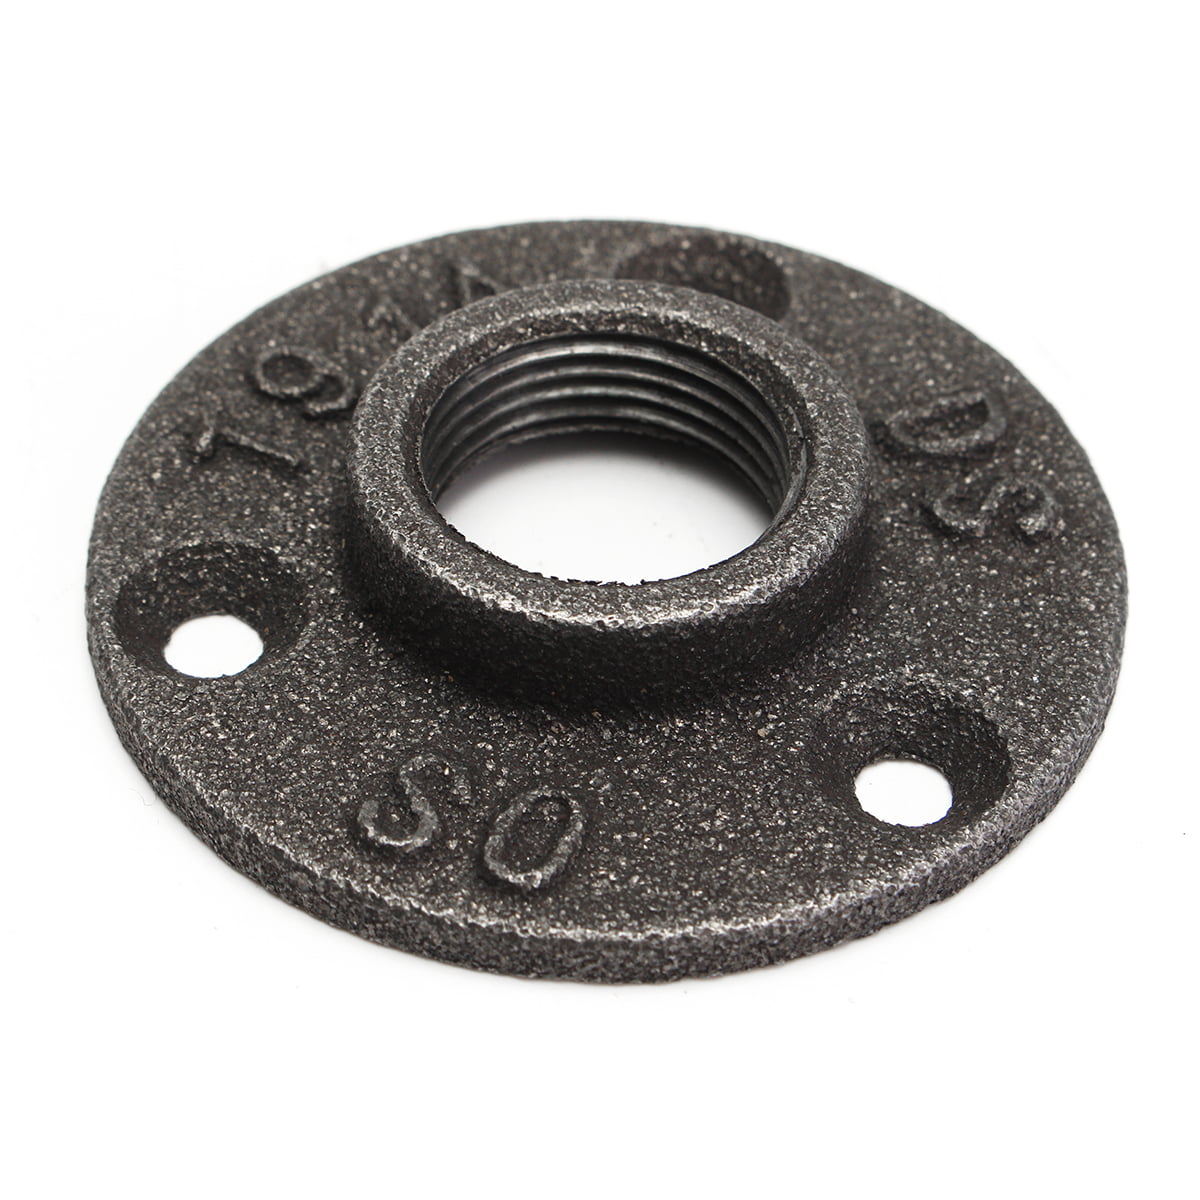 1/2" 3/4" Black Malleable Cast Iron Pipe Fittings Floor Flange BSP Threaded Hole 